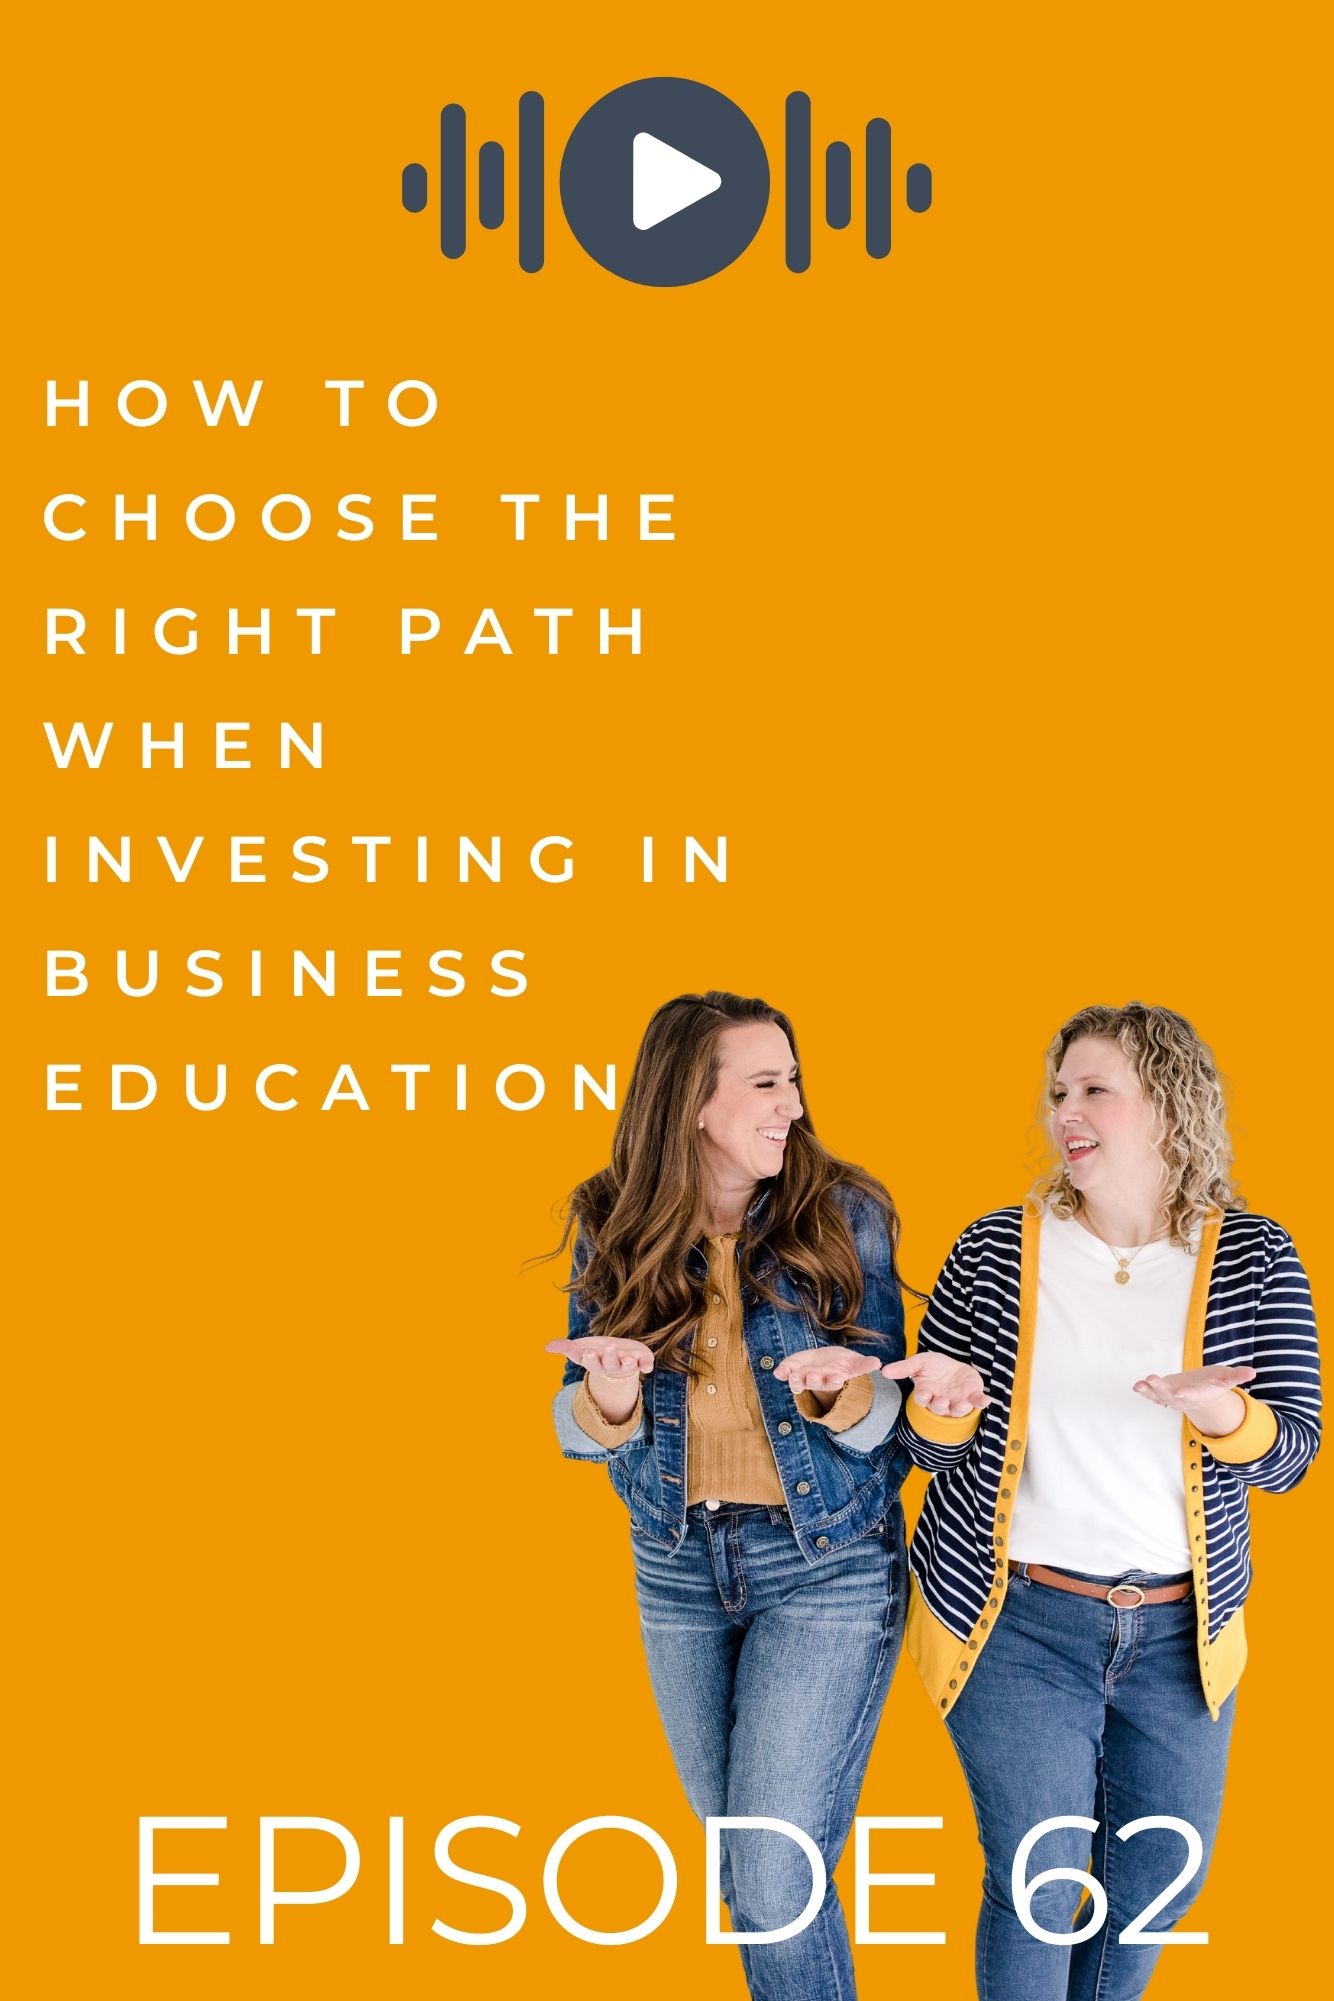 Two Christian women business owners and podcasters standing looking at each other with their palms up and wondering how to choose the right path when investing in business education.